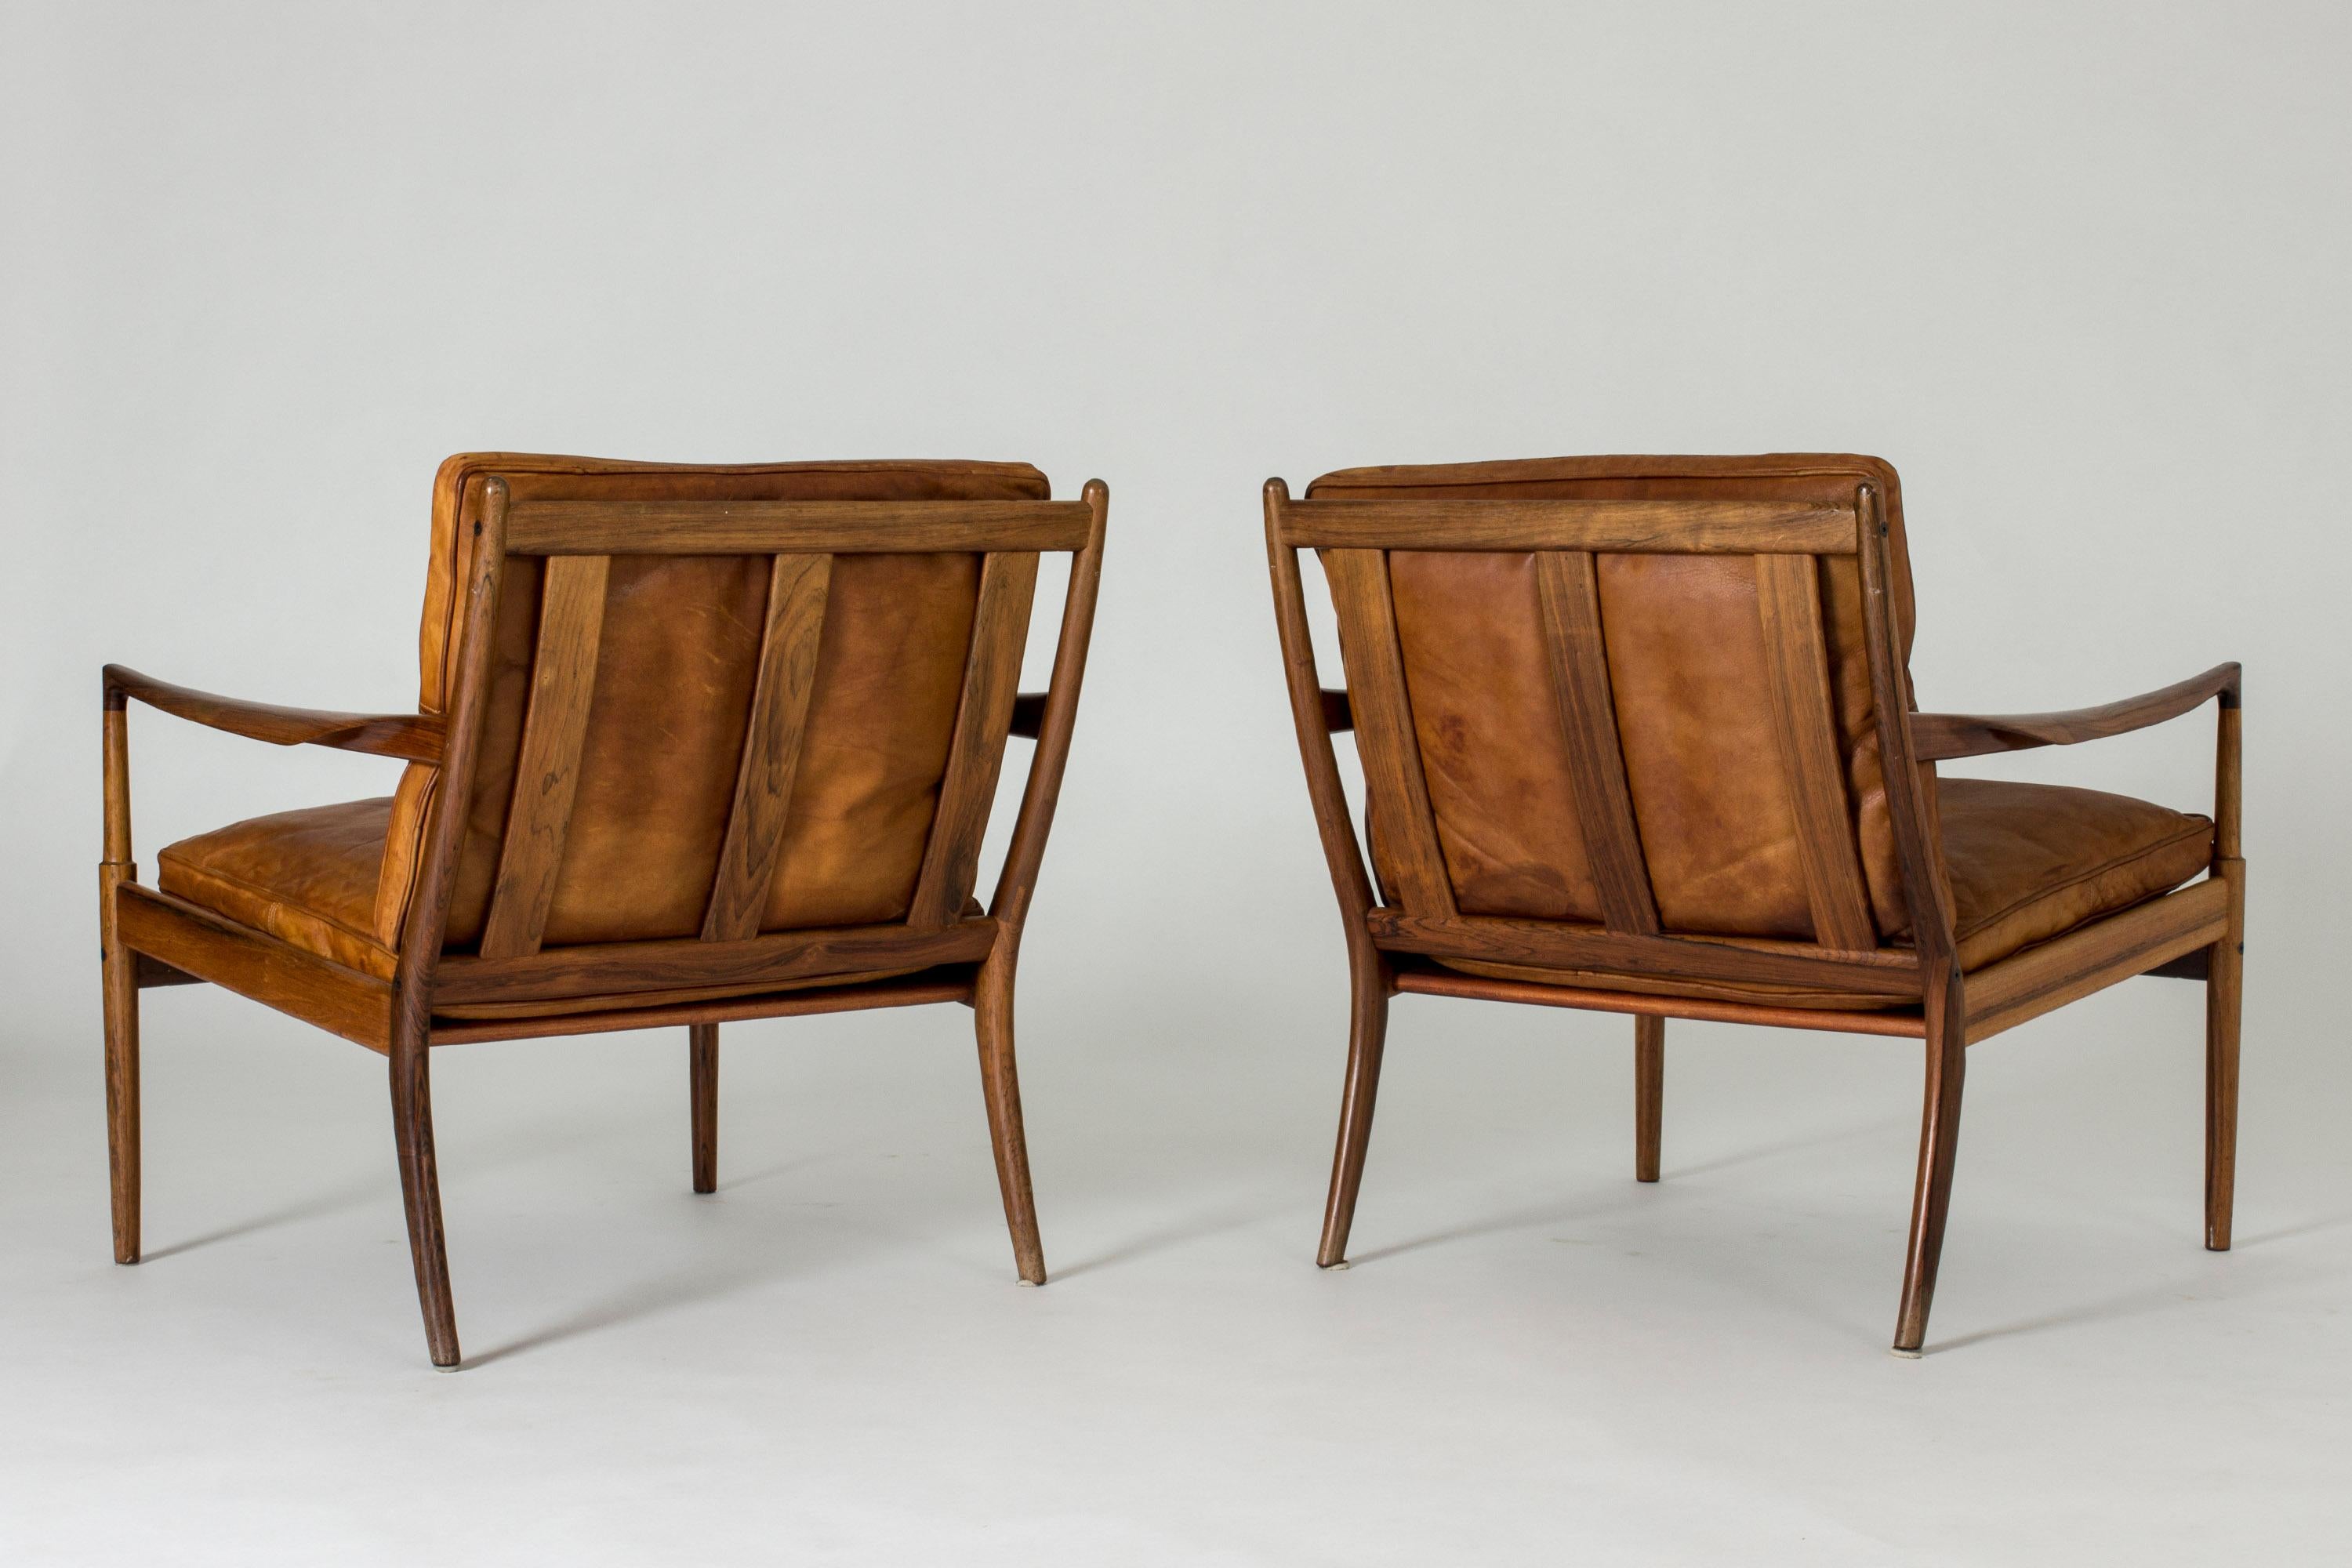 Pair of Rosewood and Leather “Samsö” Lounge Chairs by Ib Kofod Larsen 1